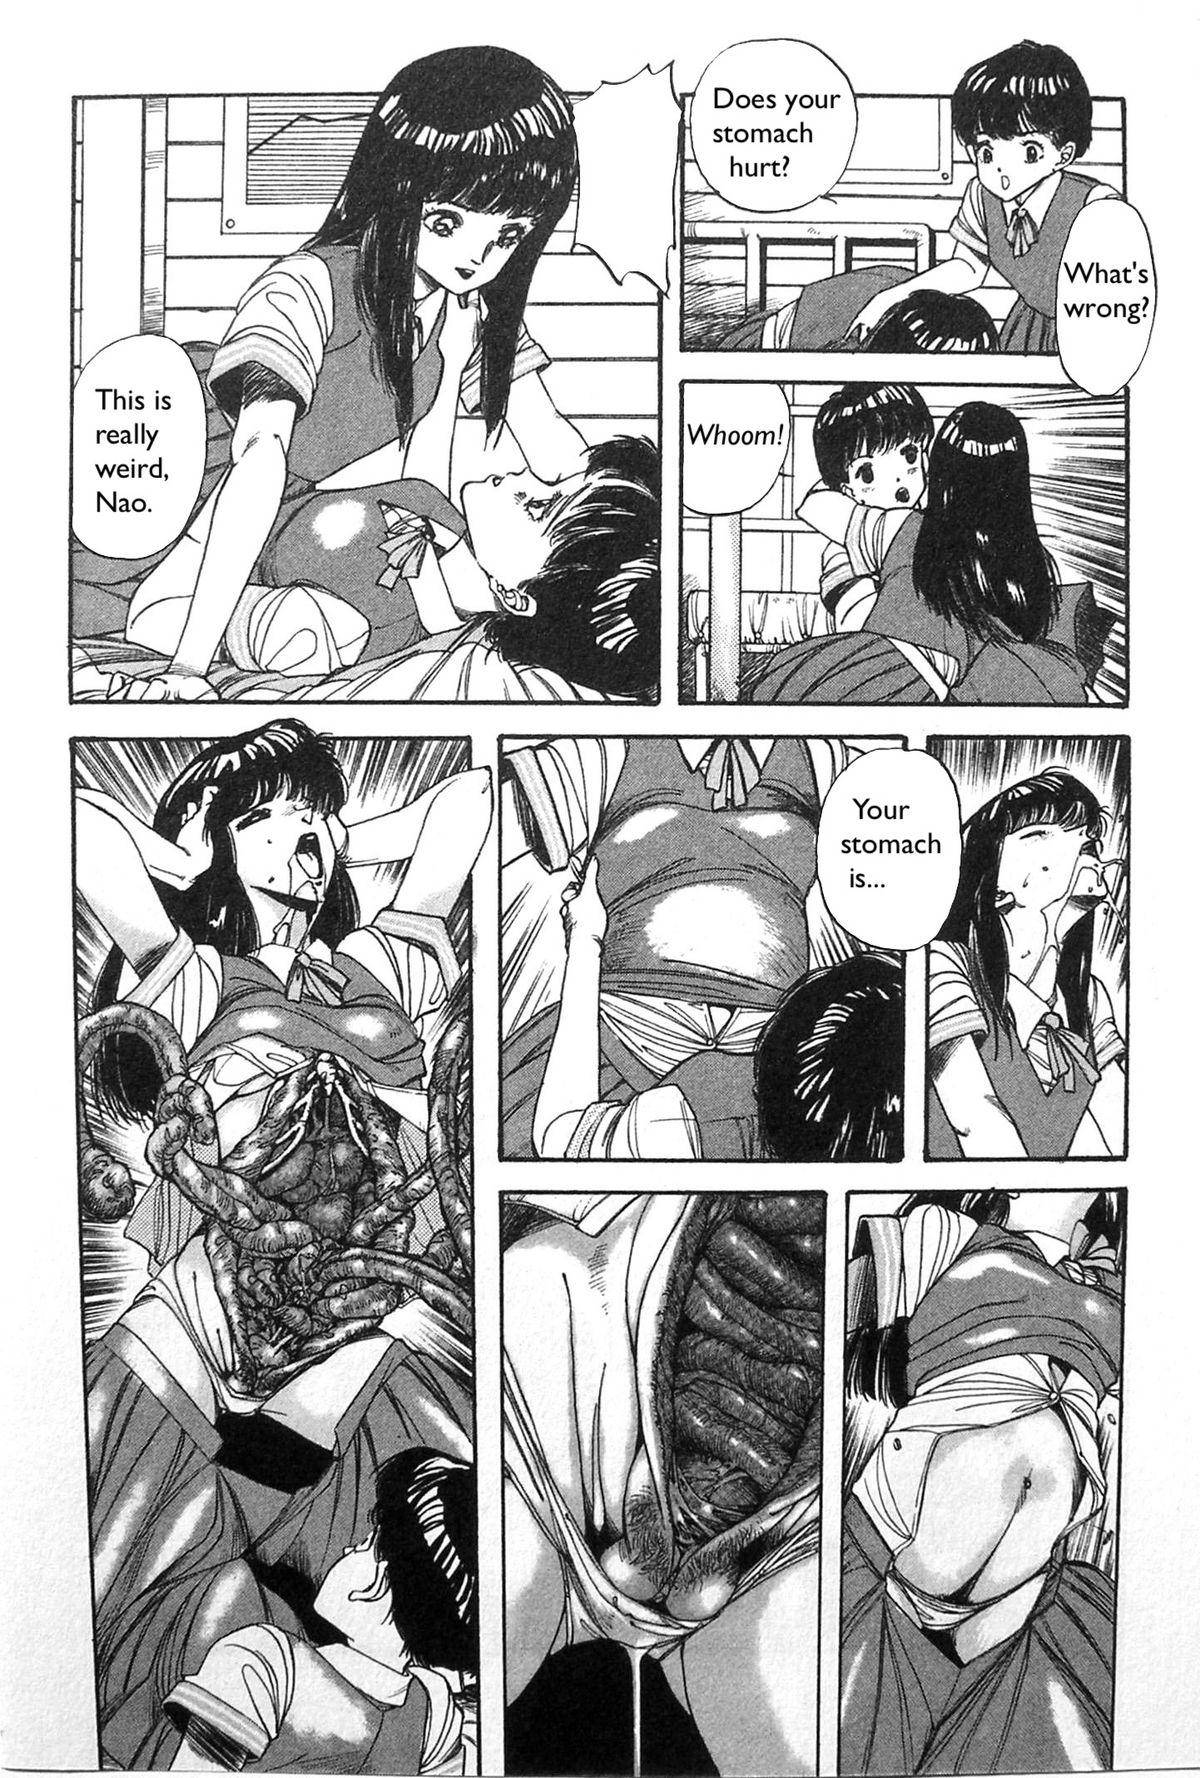 Outdoors Himei-Saka Slope of the Scream | Screaming Hill Hand Job - Page 8